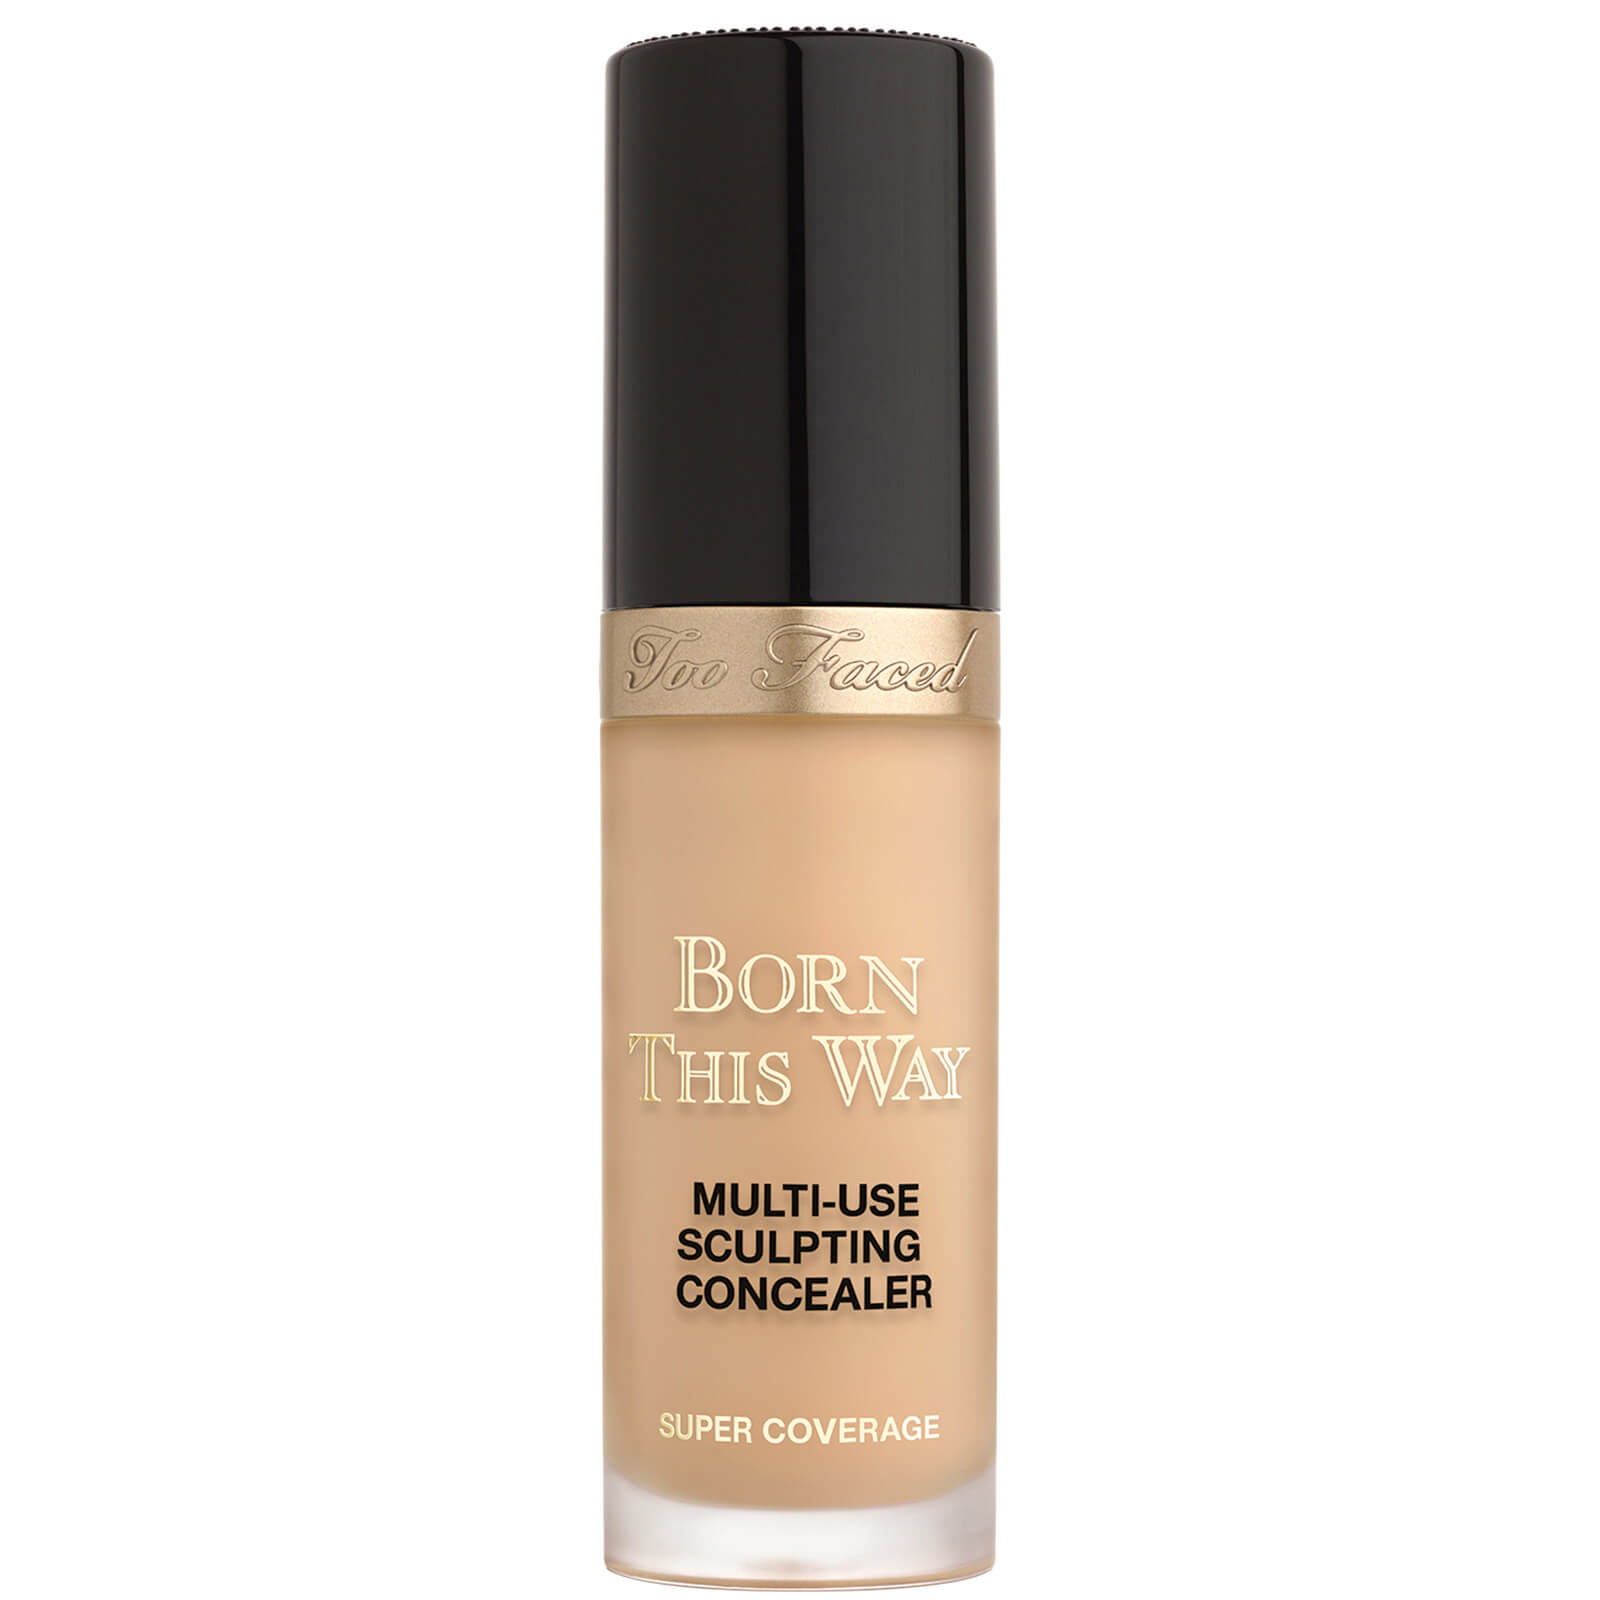 Too Faced Born This Way Super Coverage Multi-Use Concealer 13.5ml (Various Shades) - Warm Beige